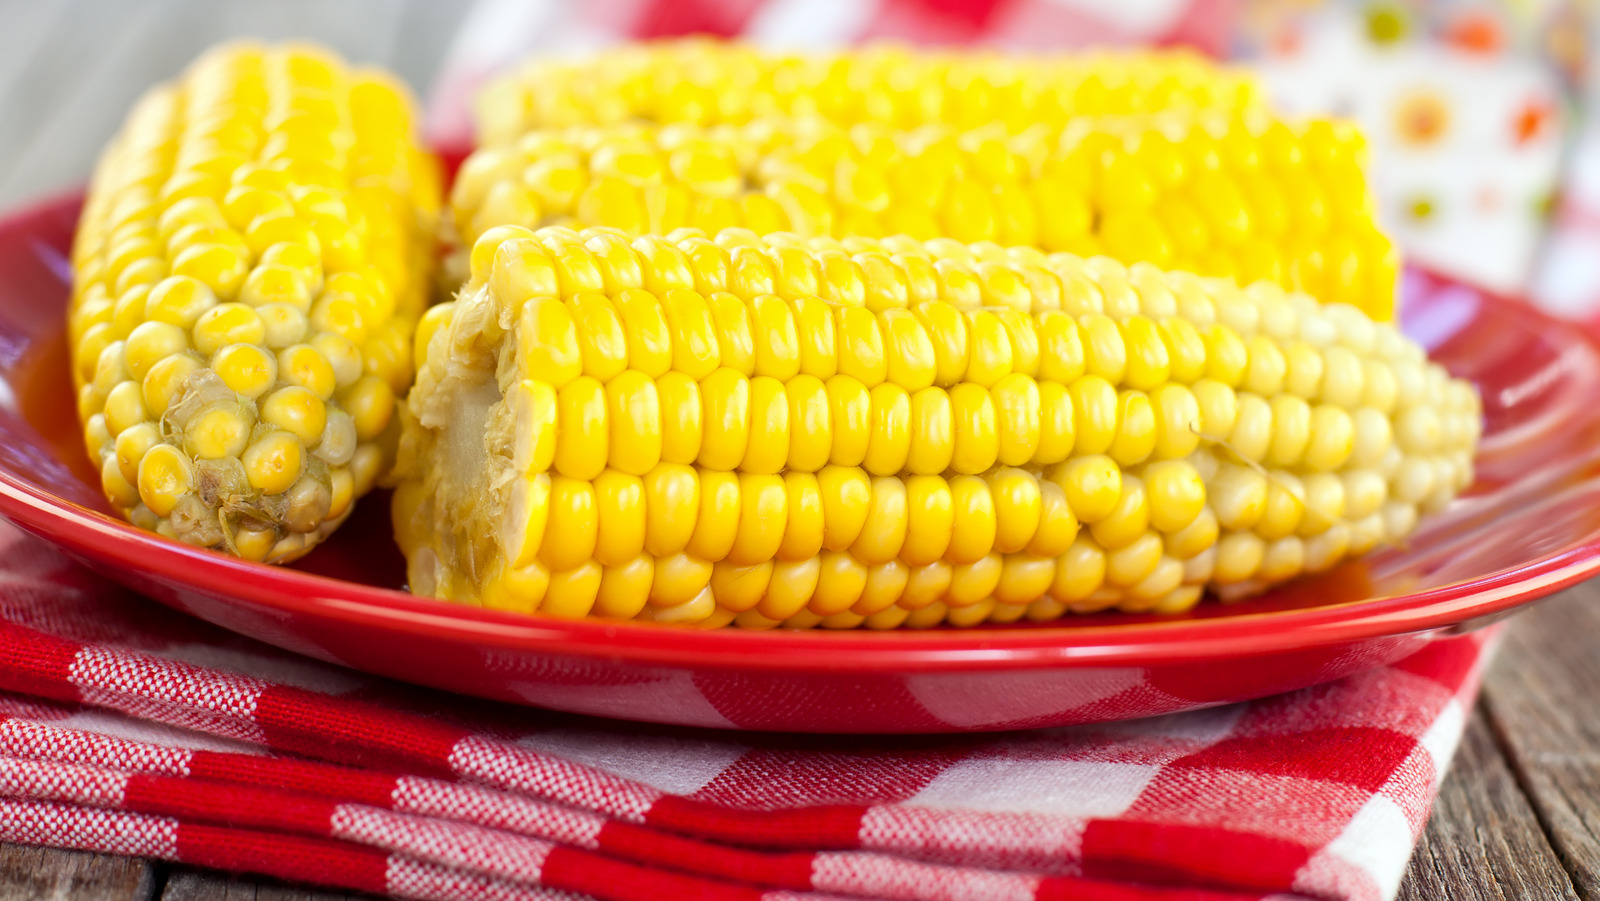 The Corn Shucking Hack To Speed Up Memorial Day Prep